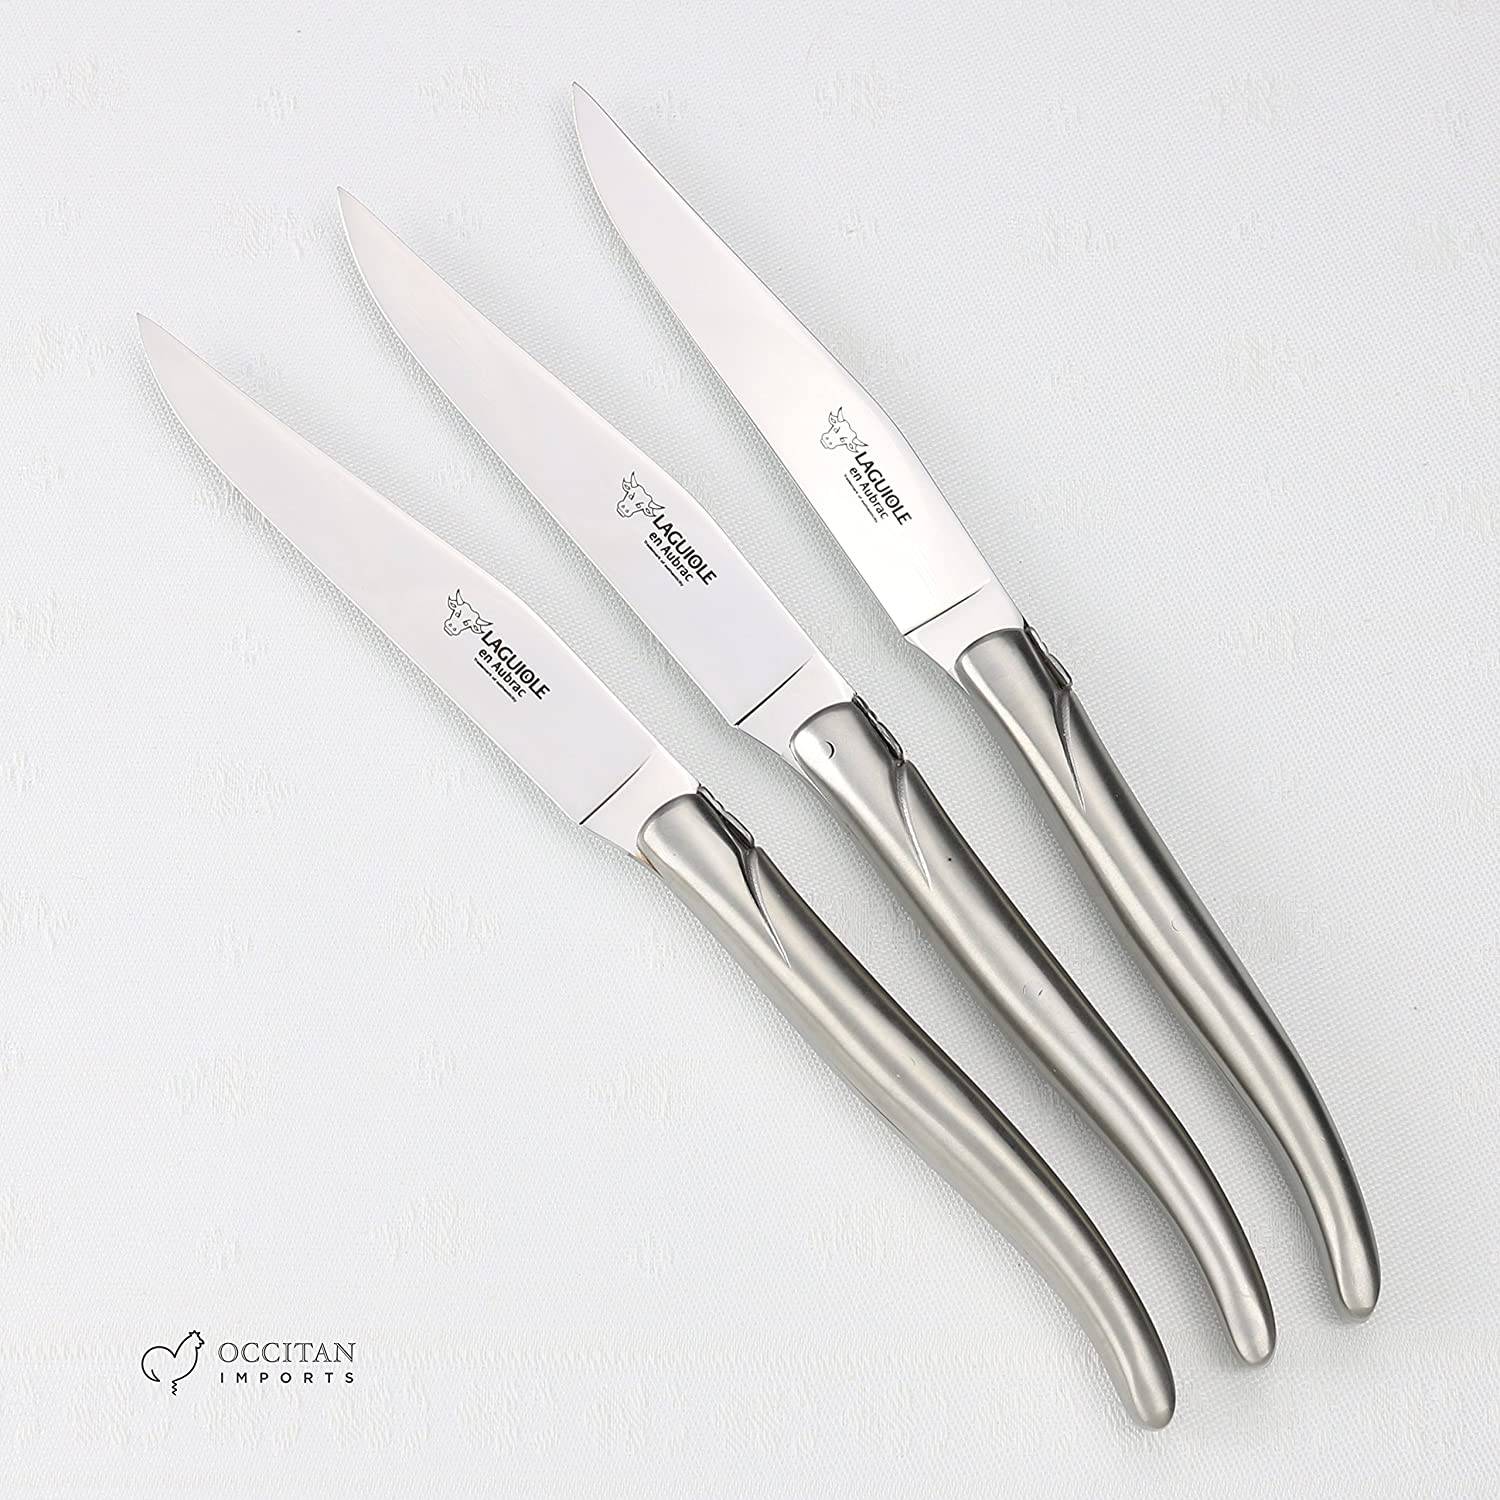 Laguiole Steak Knives Set of 6 – Stainless Steel (Shiny)